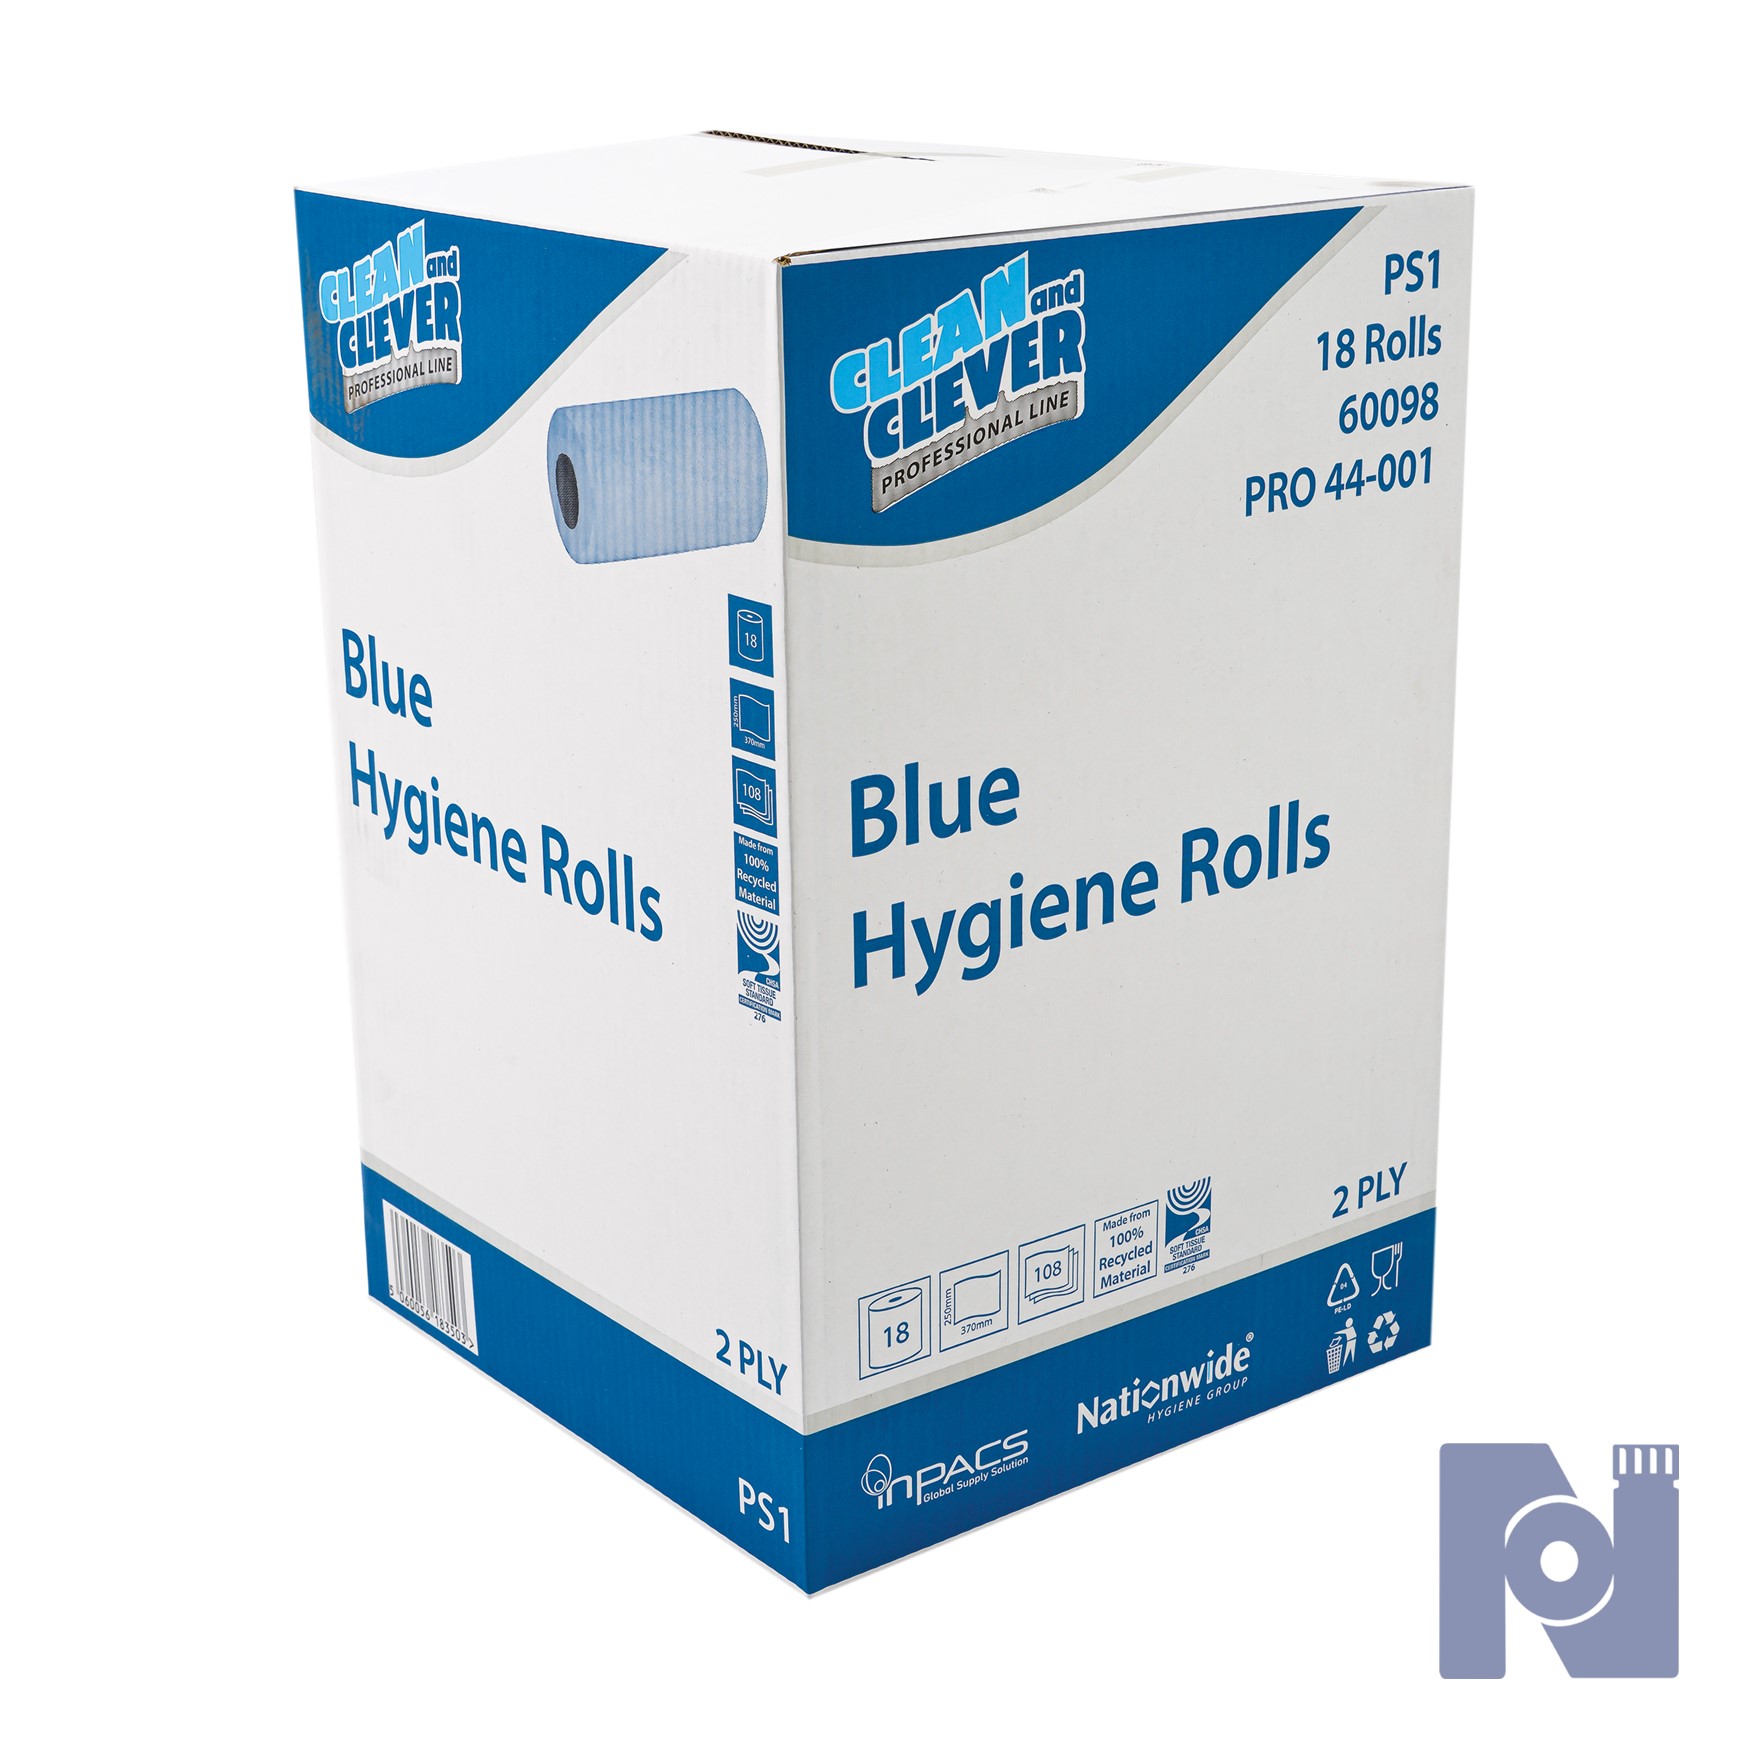 Clean & Clever Hygiene Roll - Blue PS1